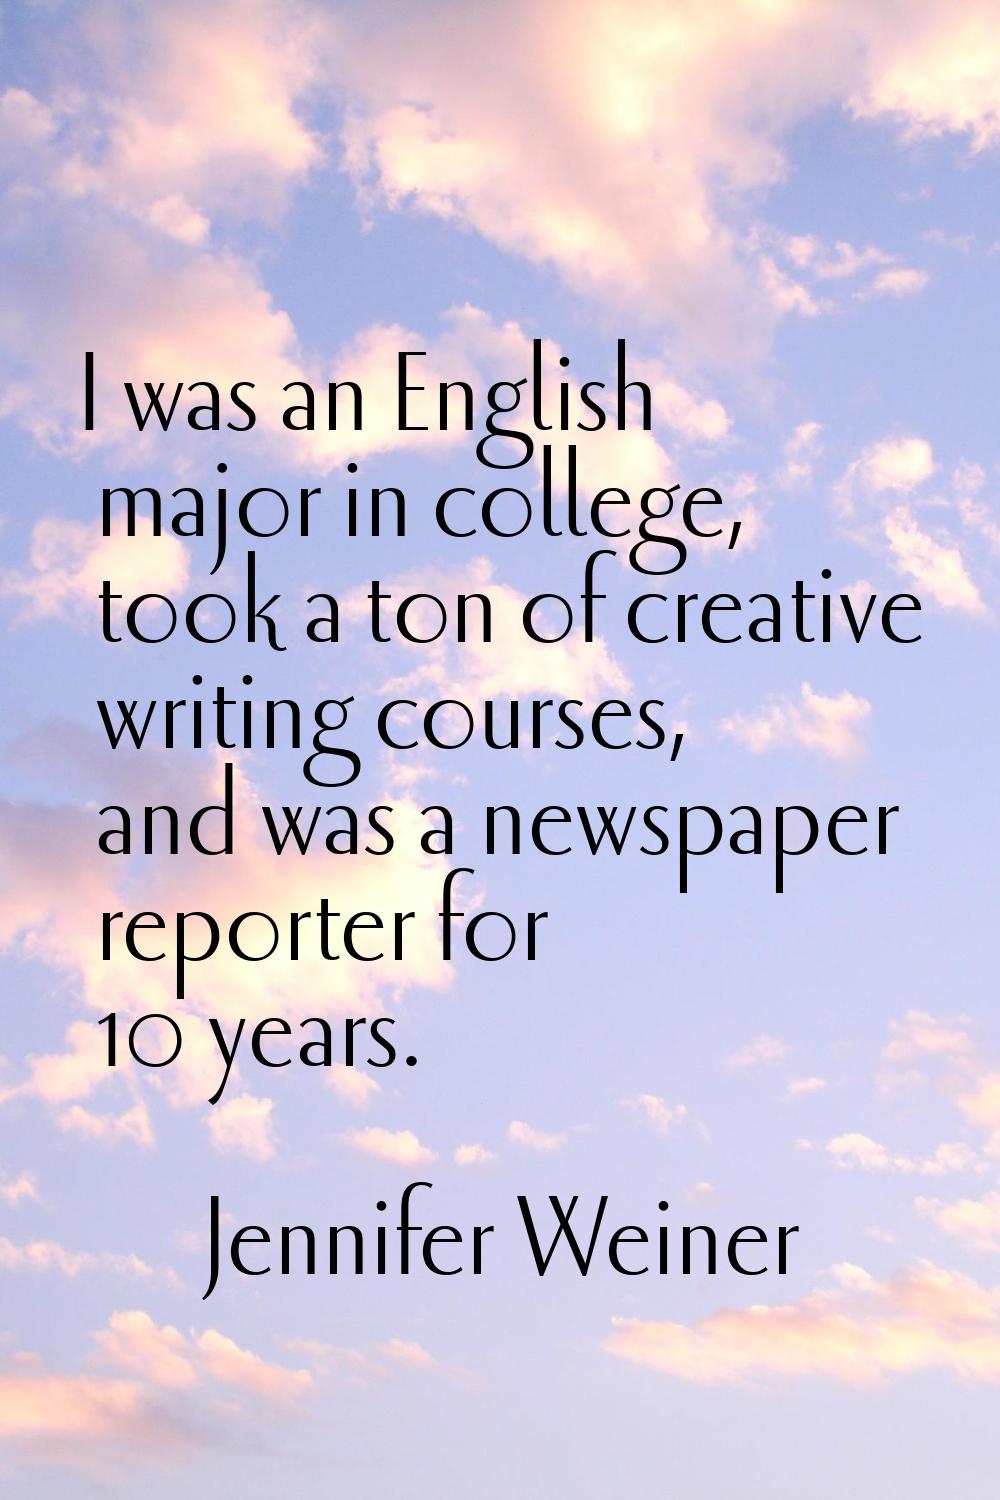 I was an English major in college, took a ton of creative writing courses, and was a newspaper repo